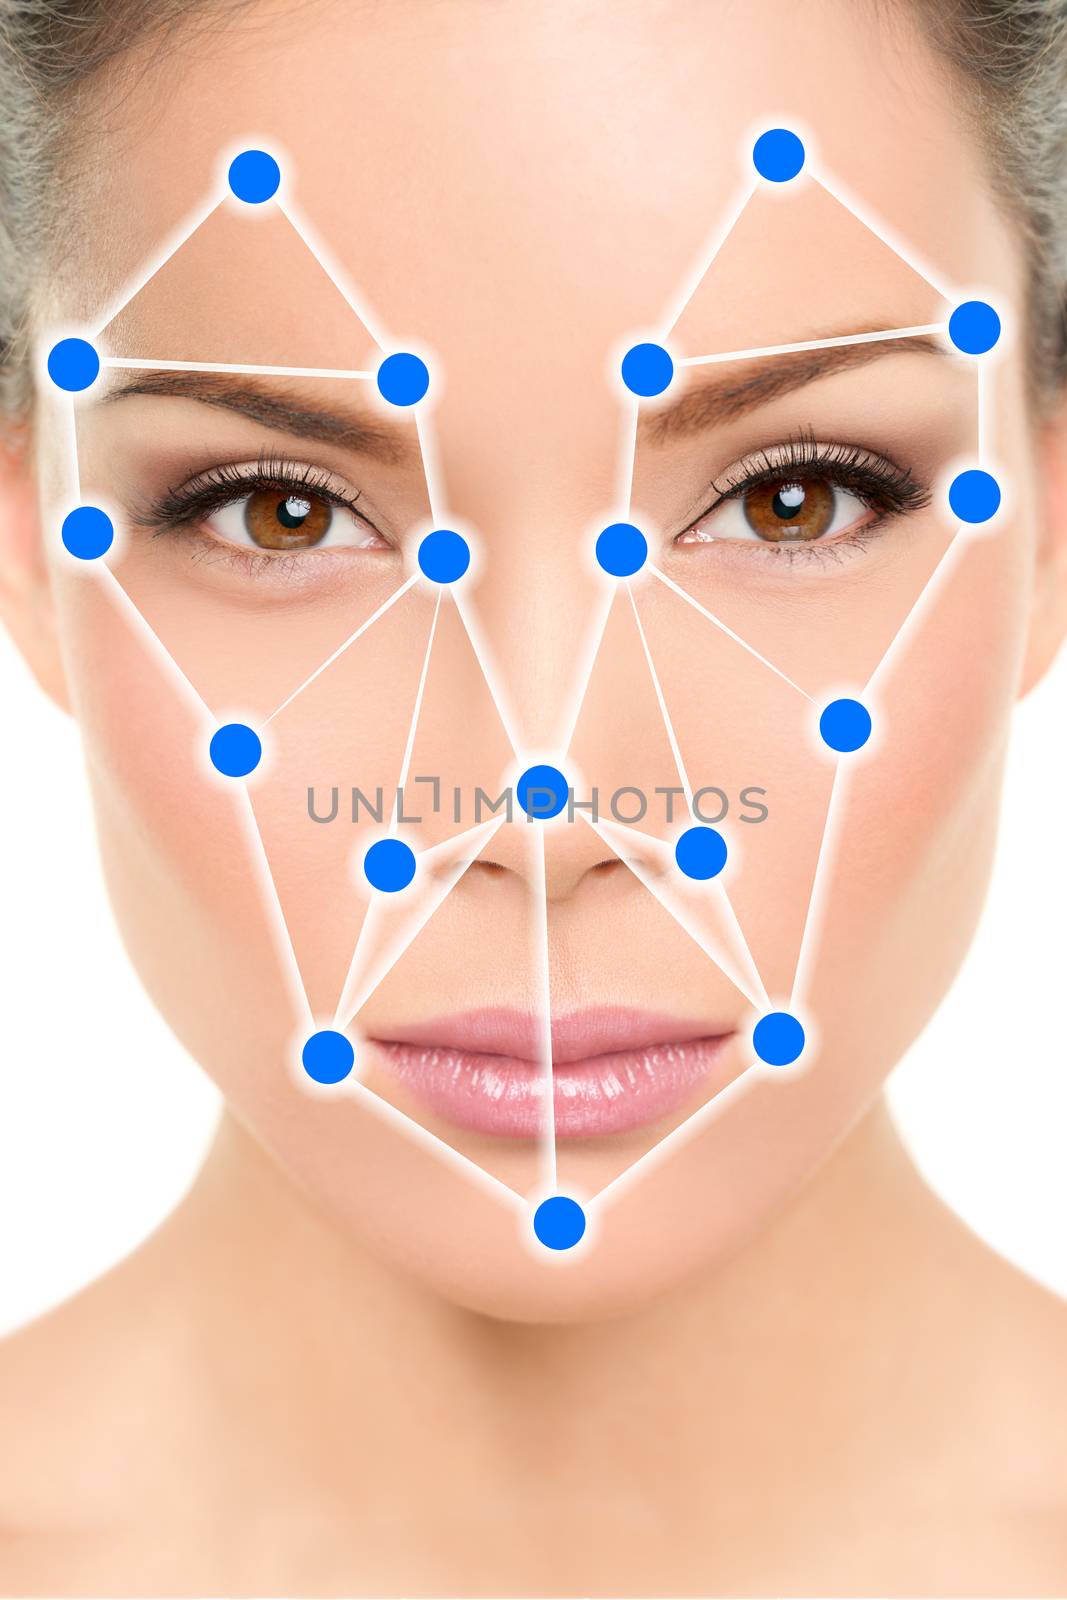 Biometric facial recognition software app technology for face identity verification identification concept. Asian woman portrait with scan illustration graphic design.